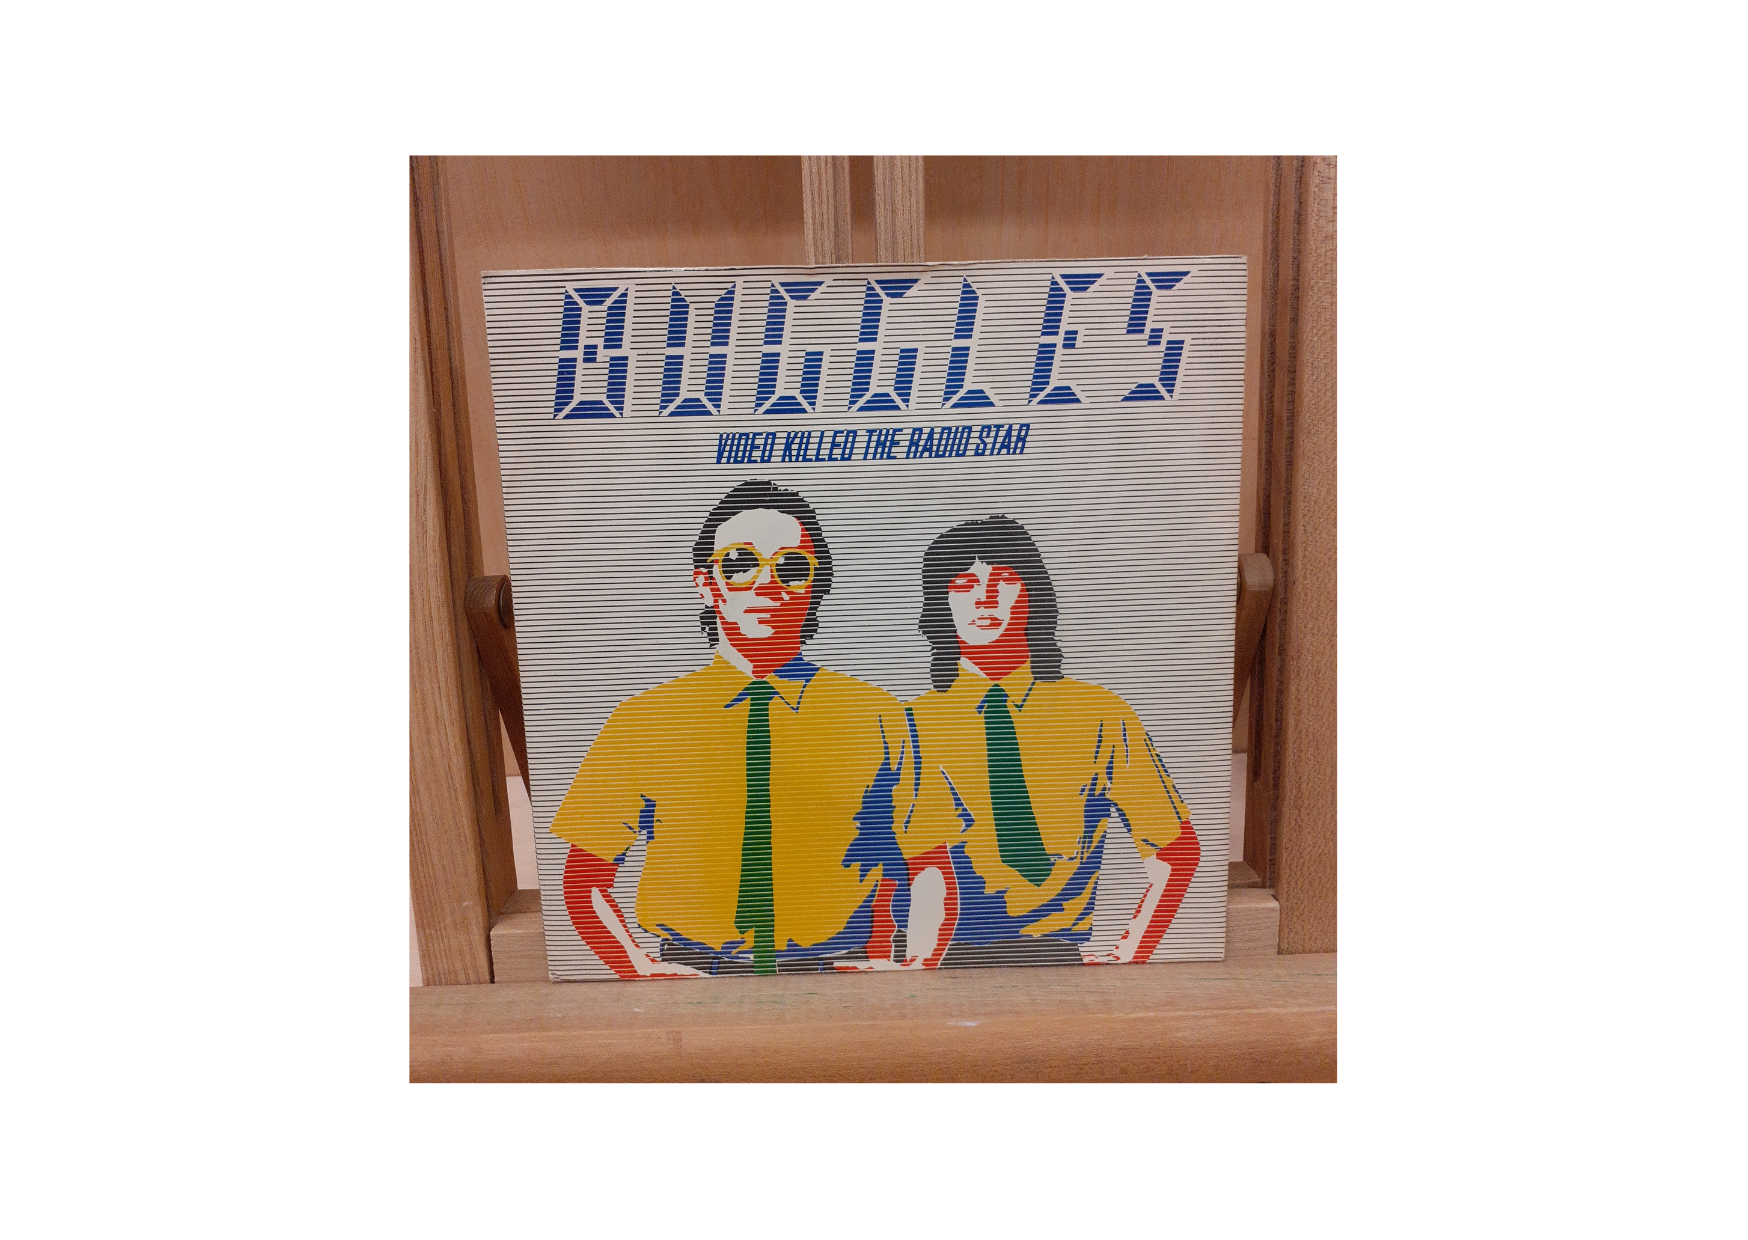 The Buggles Video Killed The Radio Star Front View 7" Single